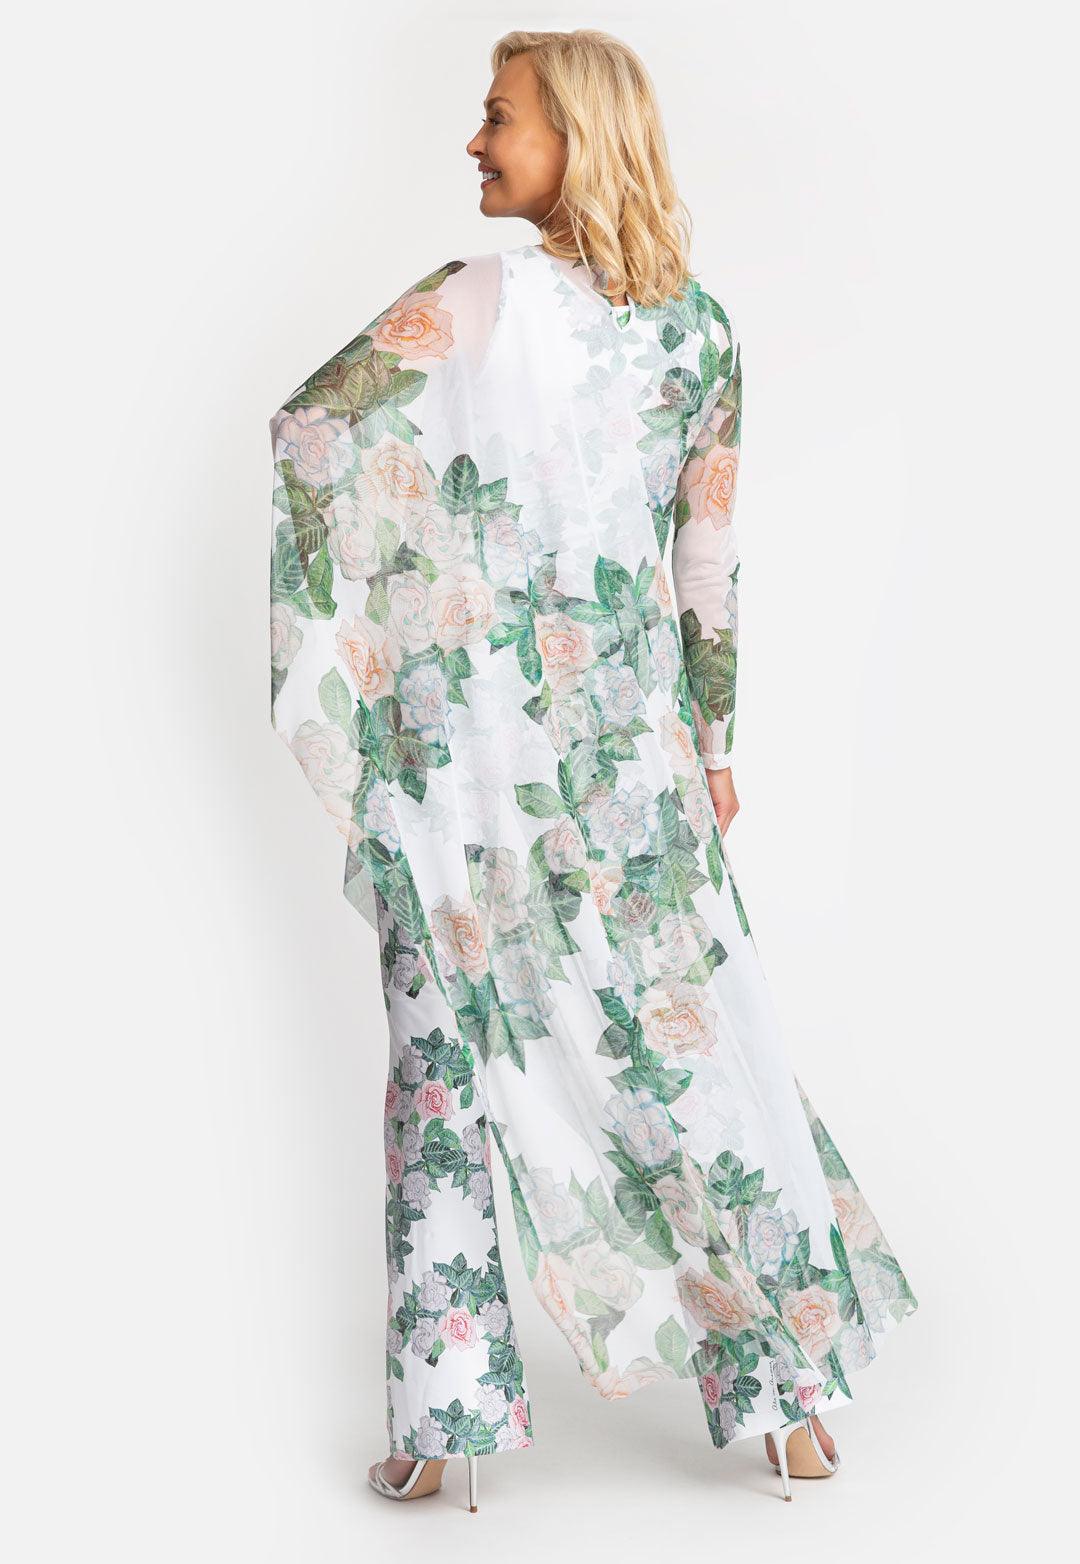 mesh one sleeved gardena flower printed poncho over stretch knit tank top and stretch knit pants in gardenia flower print